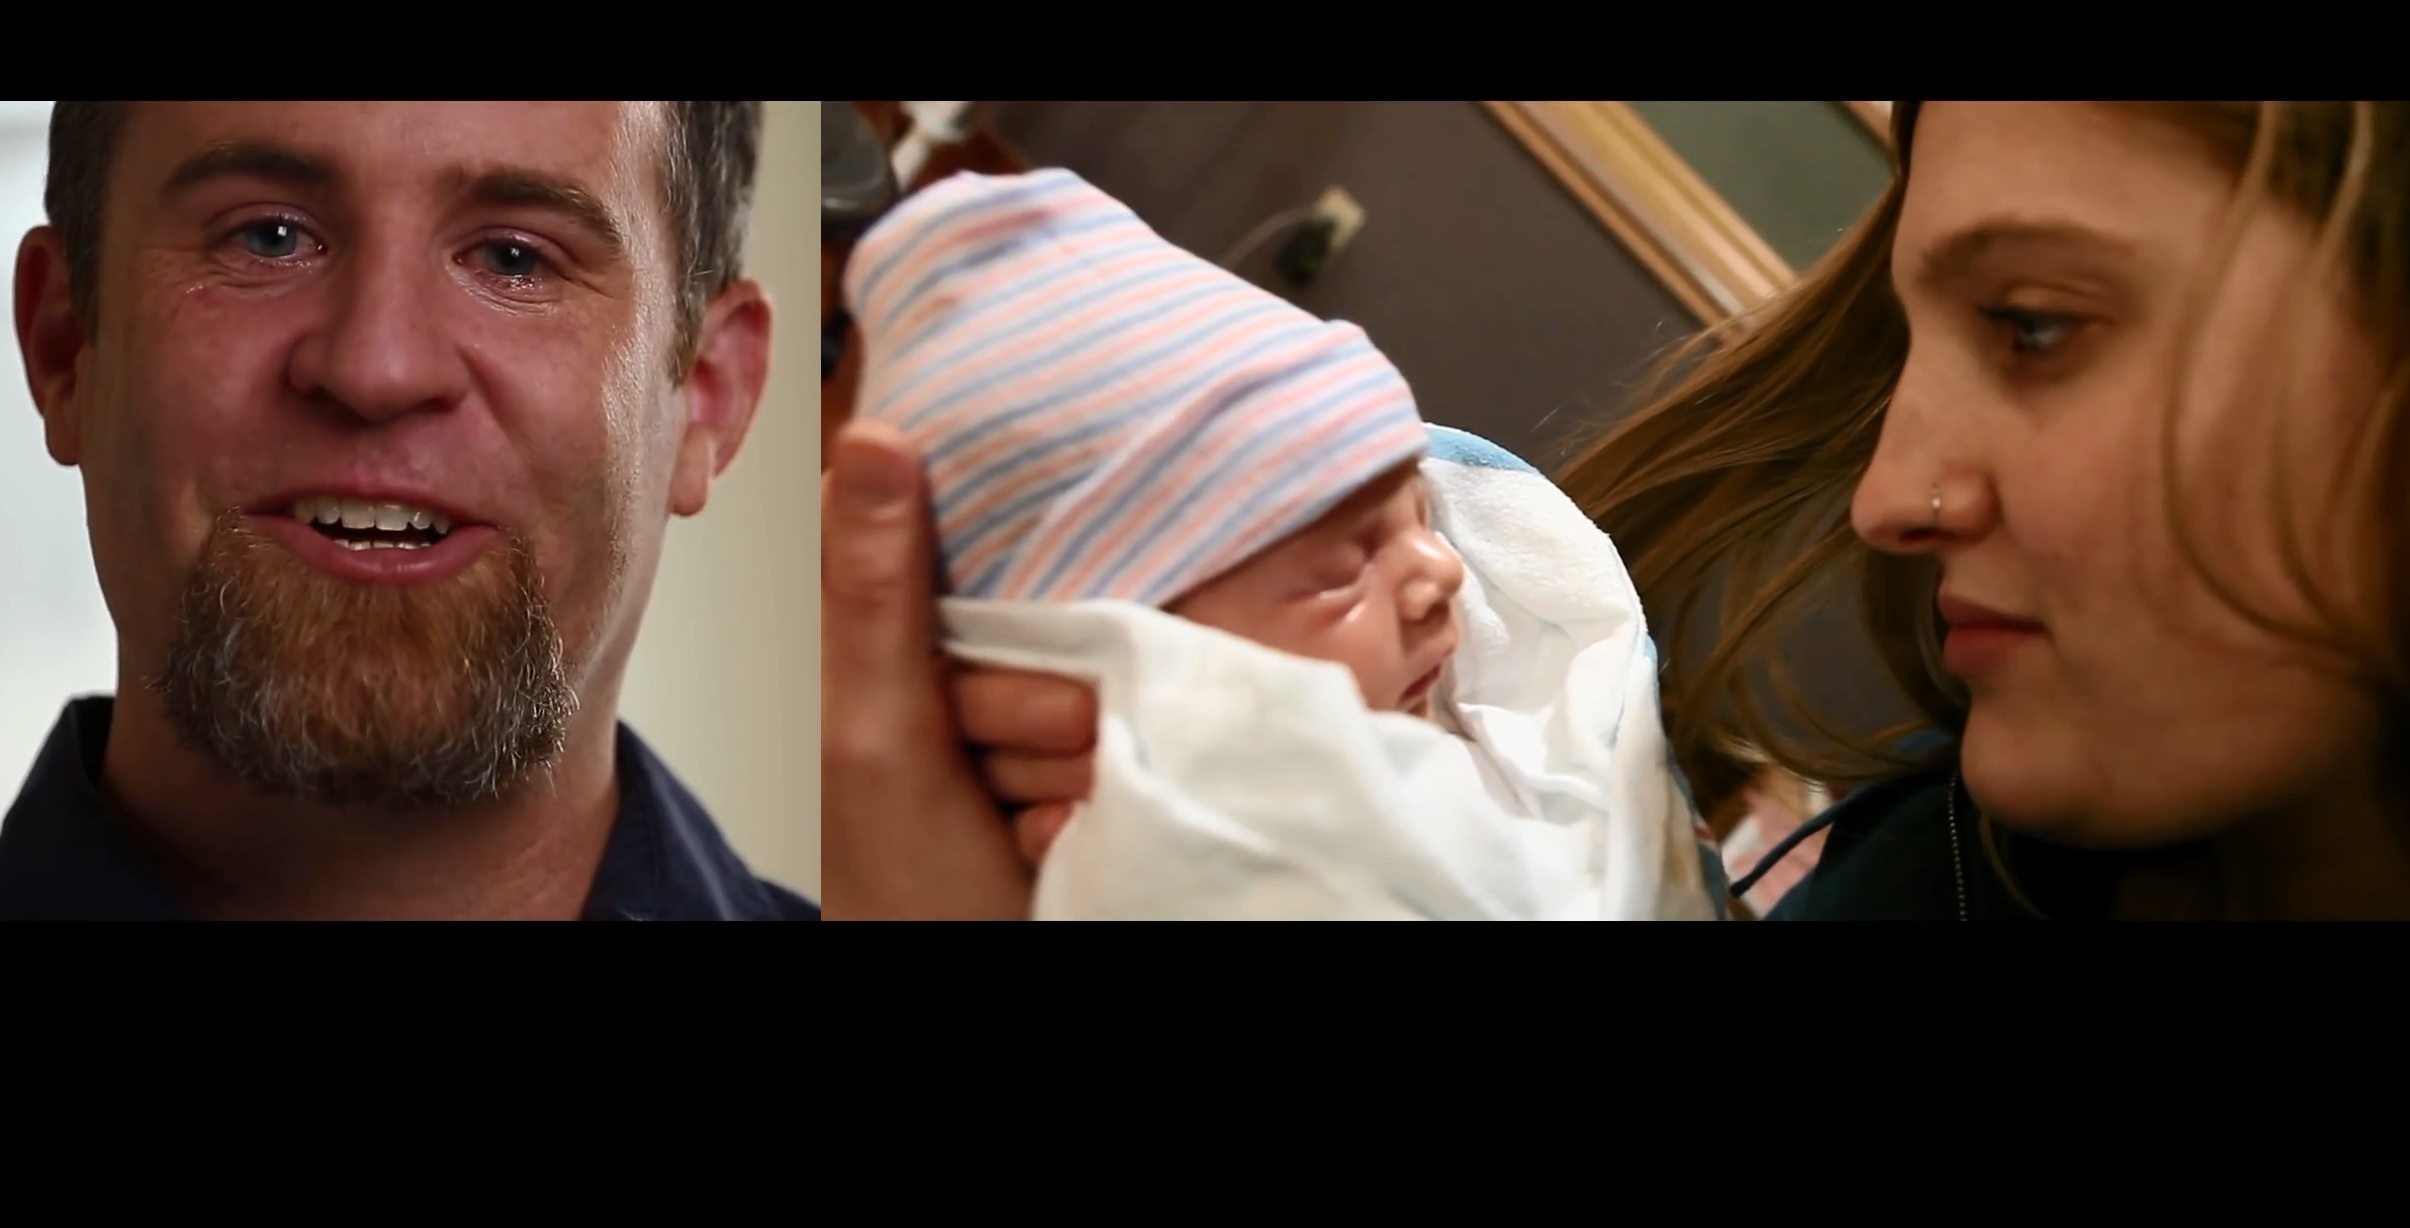 New-born Adoption Is Underway, But When Dad Looks Closer At Birth Mom, He Realizes He’s Seen Her Before!